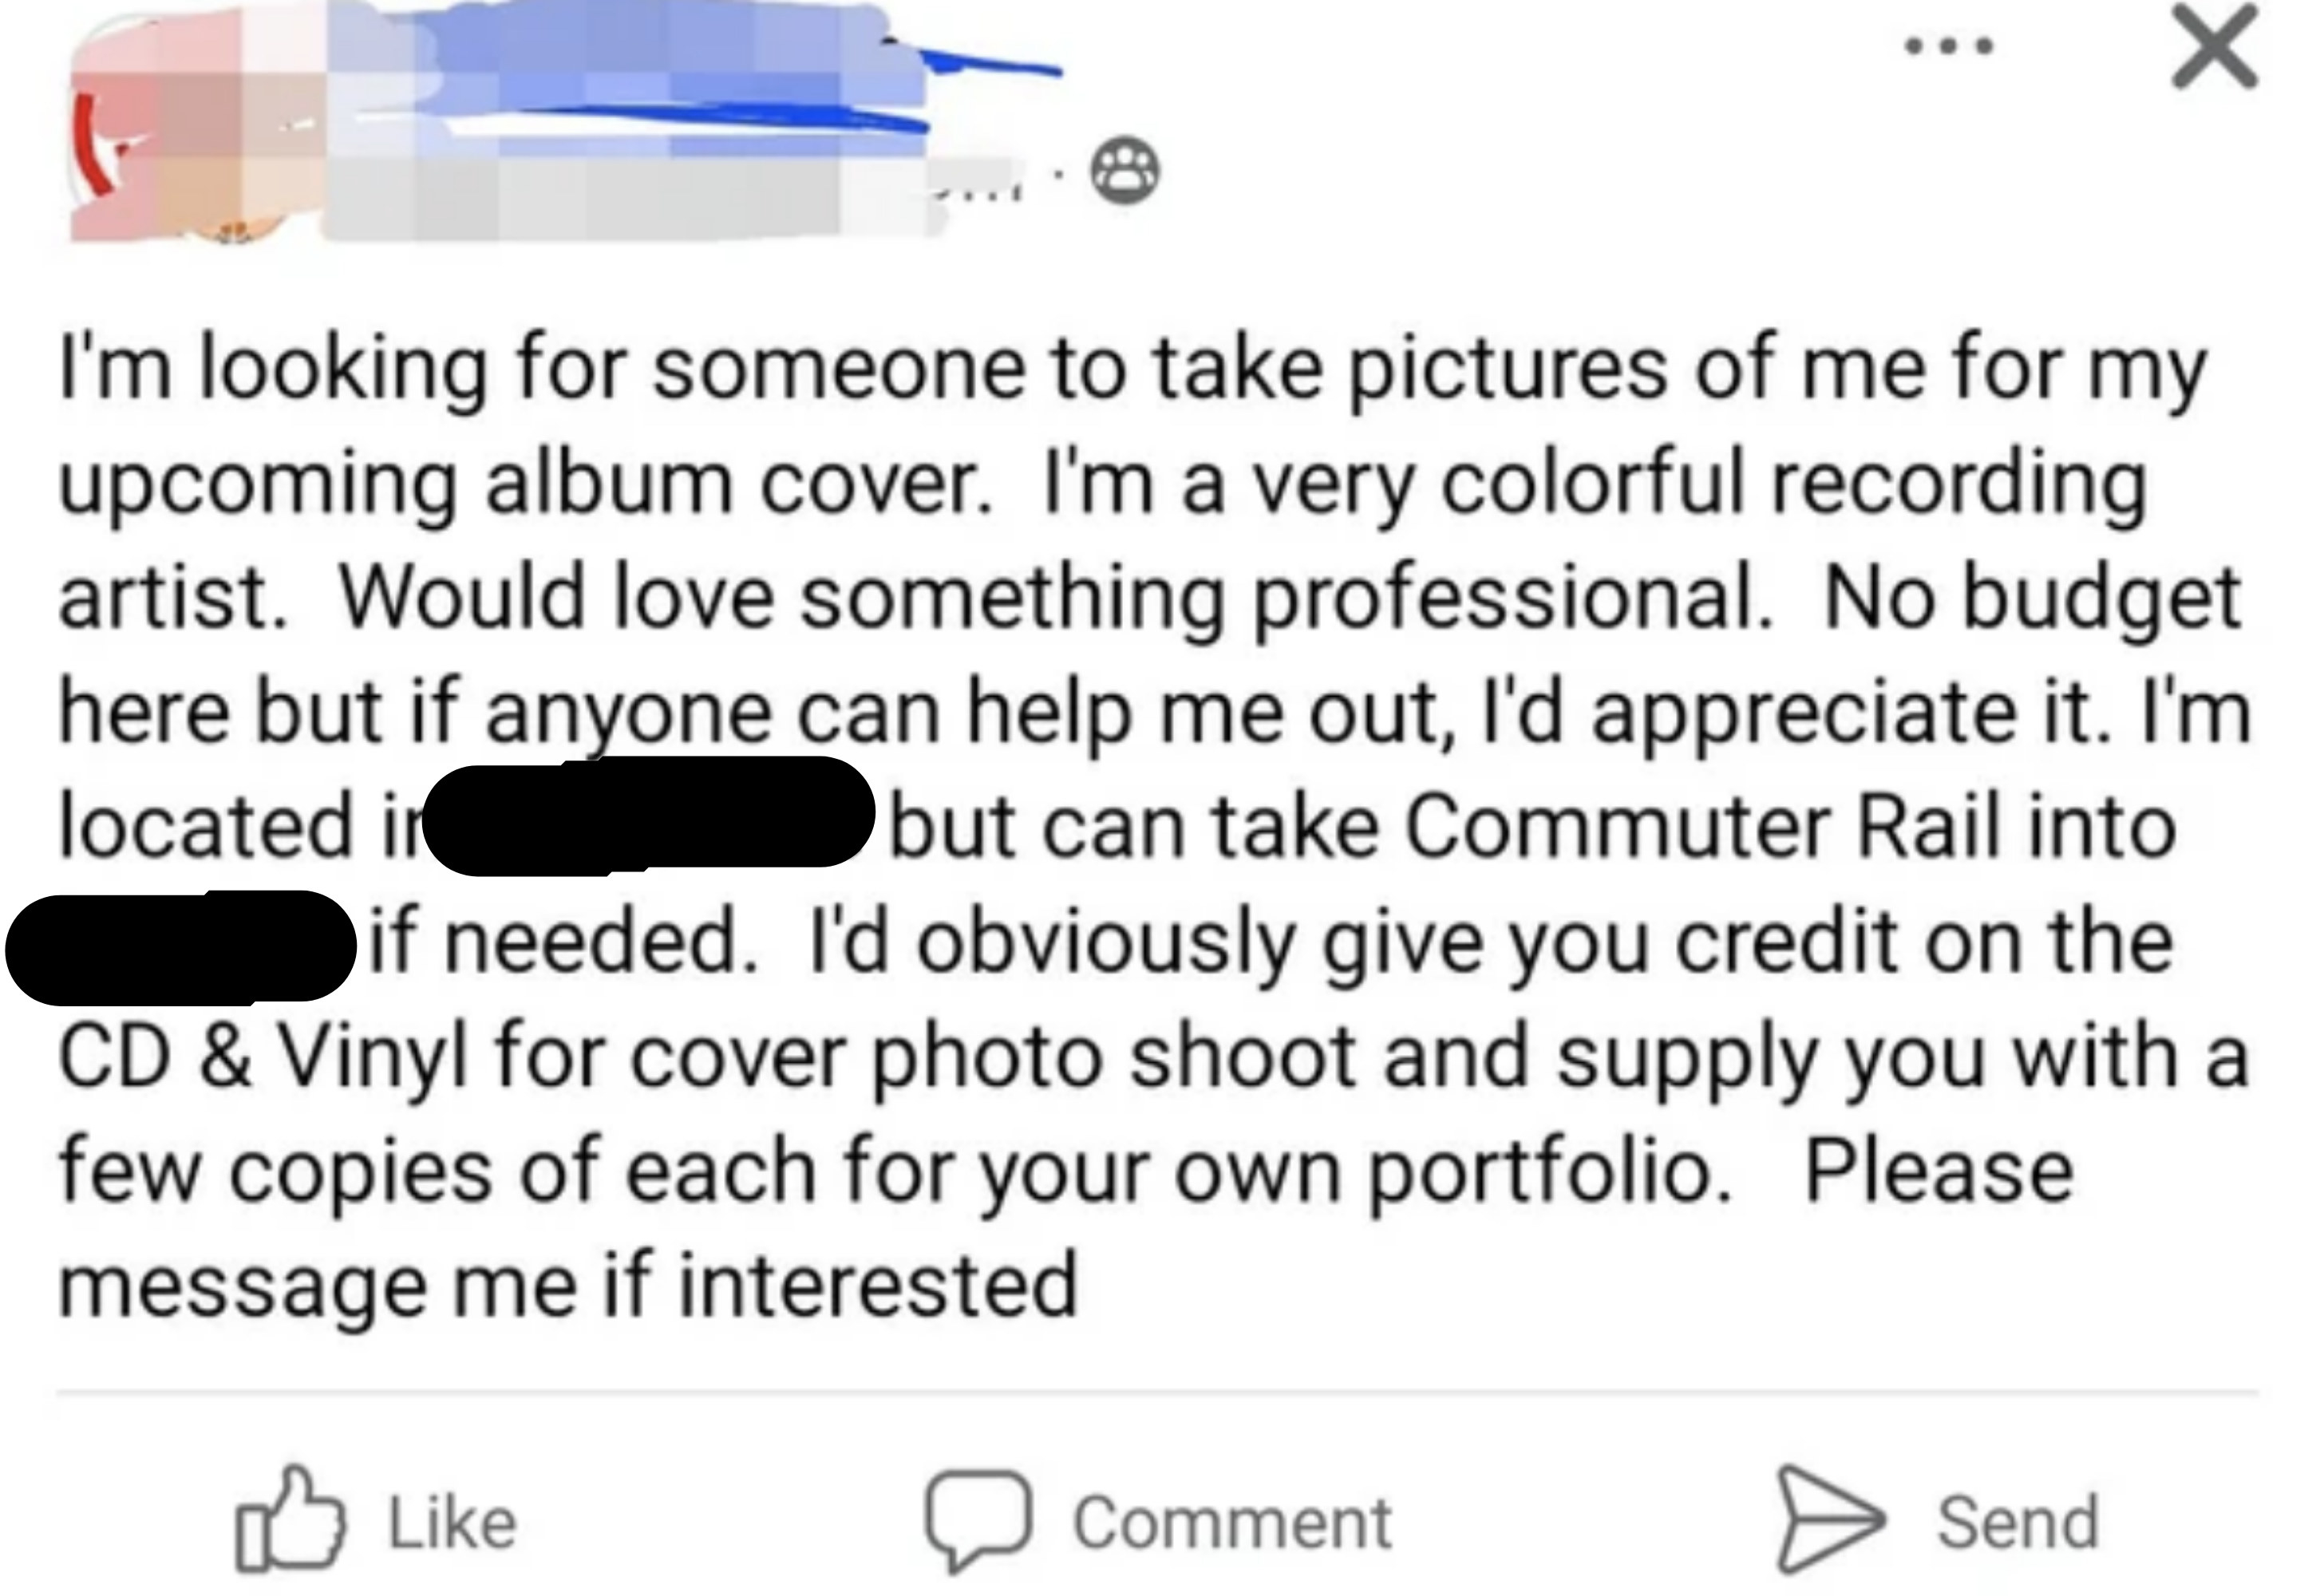 Someone asking for free photos